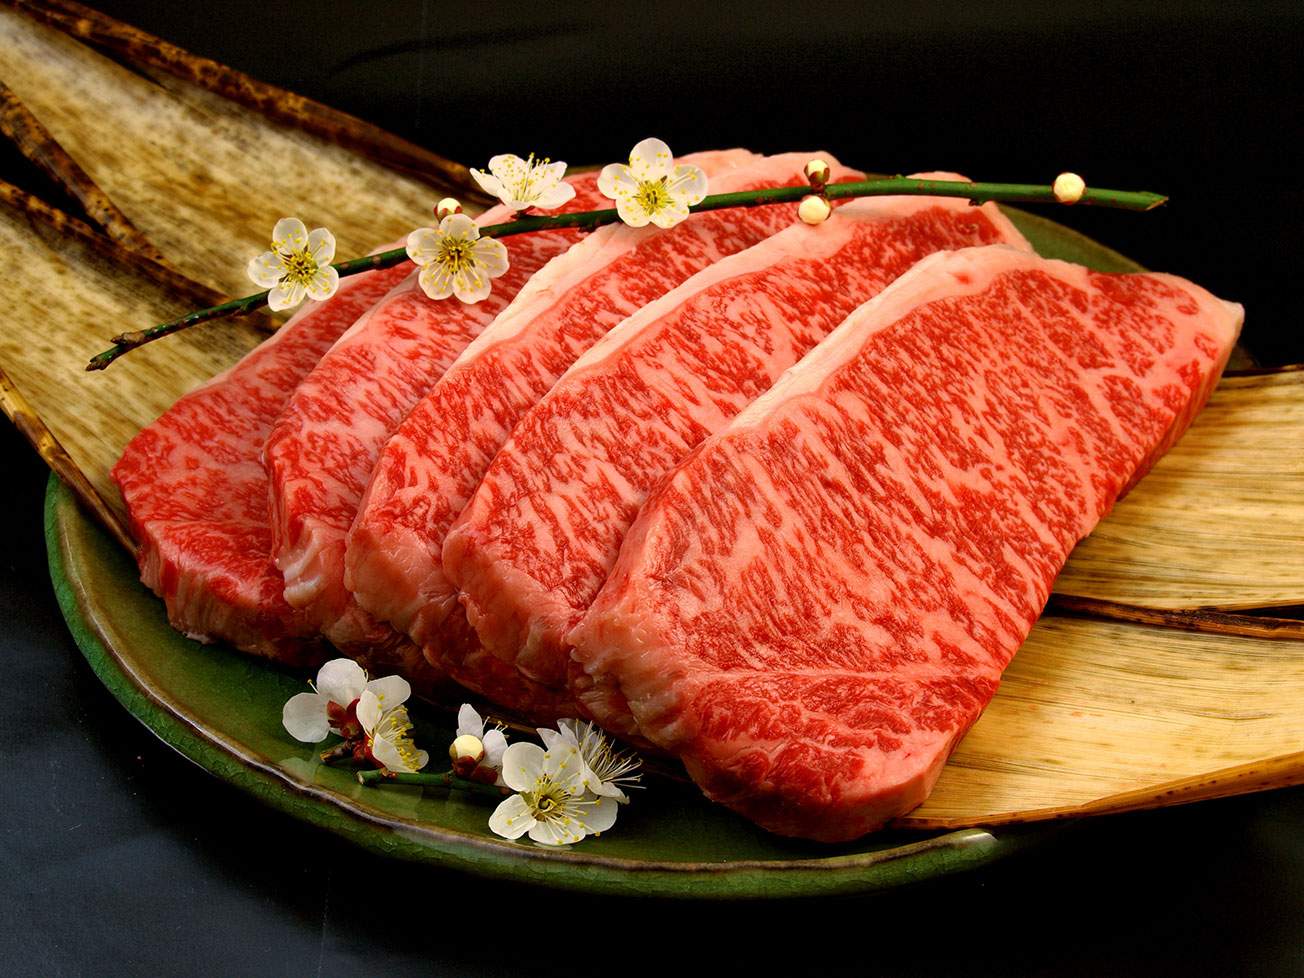 Kobe beef and Matsuzaka beef are not the only kinds of beef. We use many brands of beef depending on the meat quality.